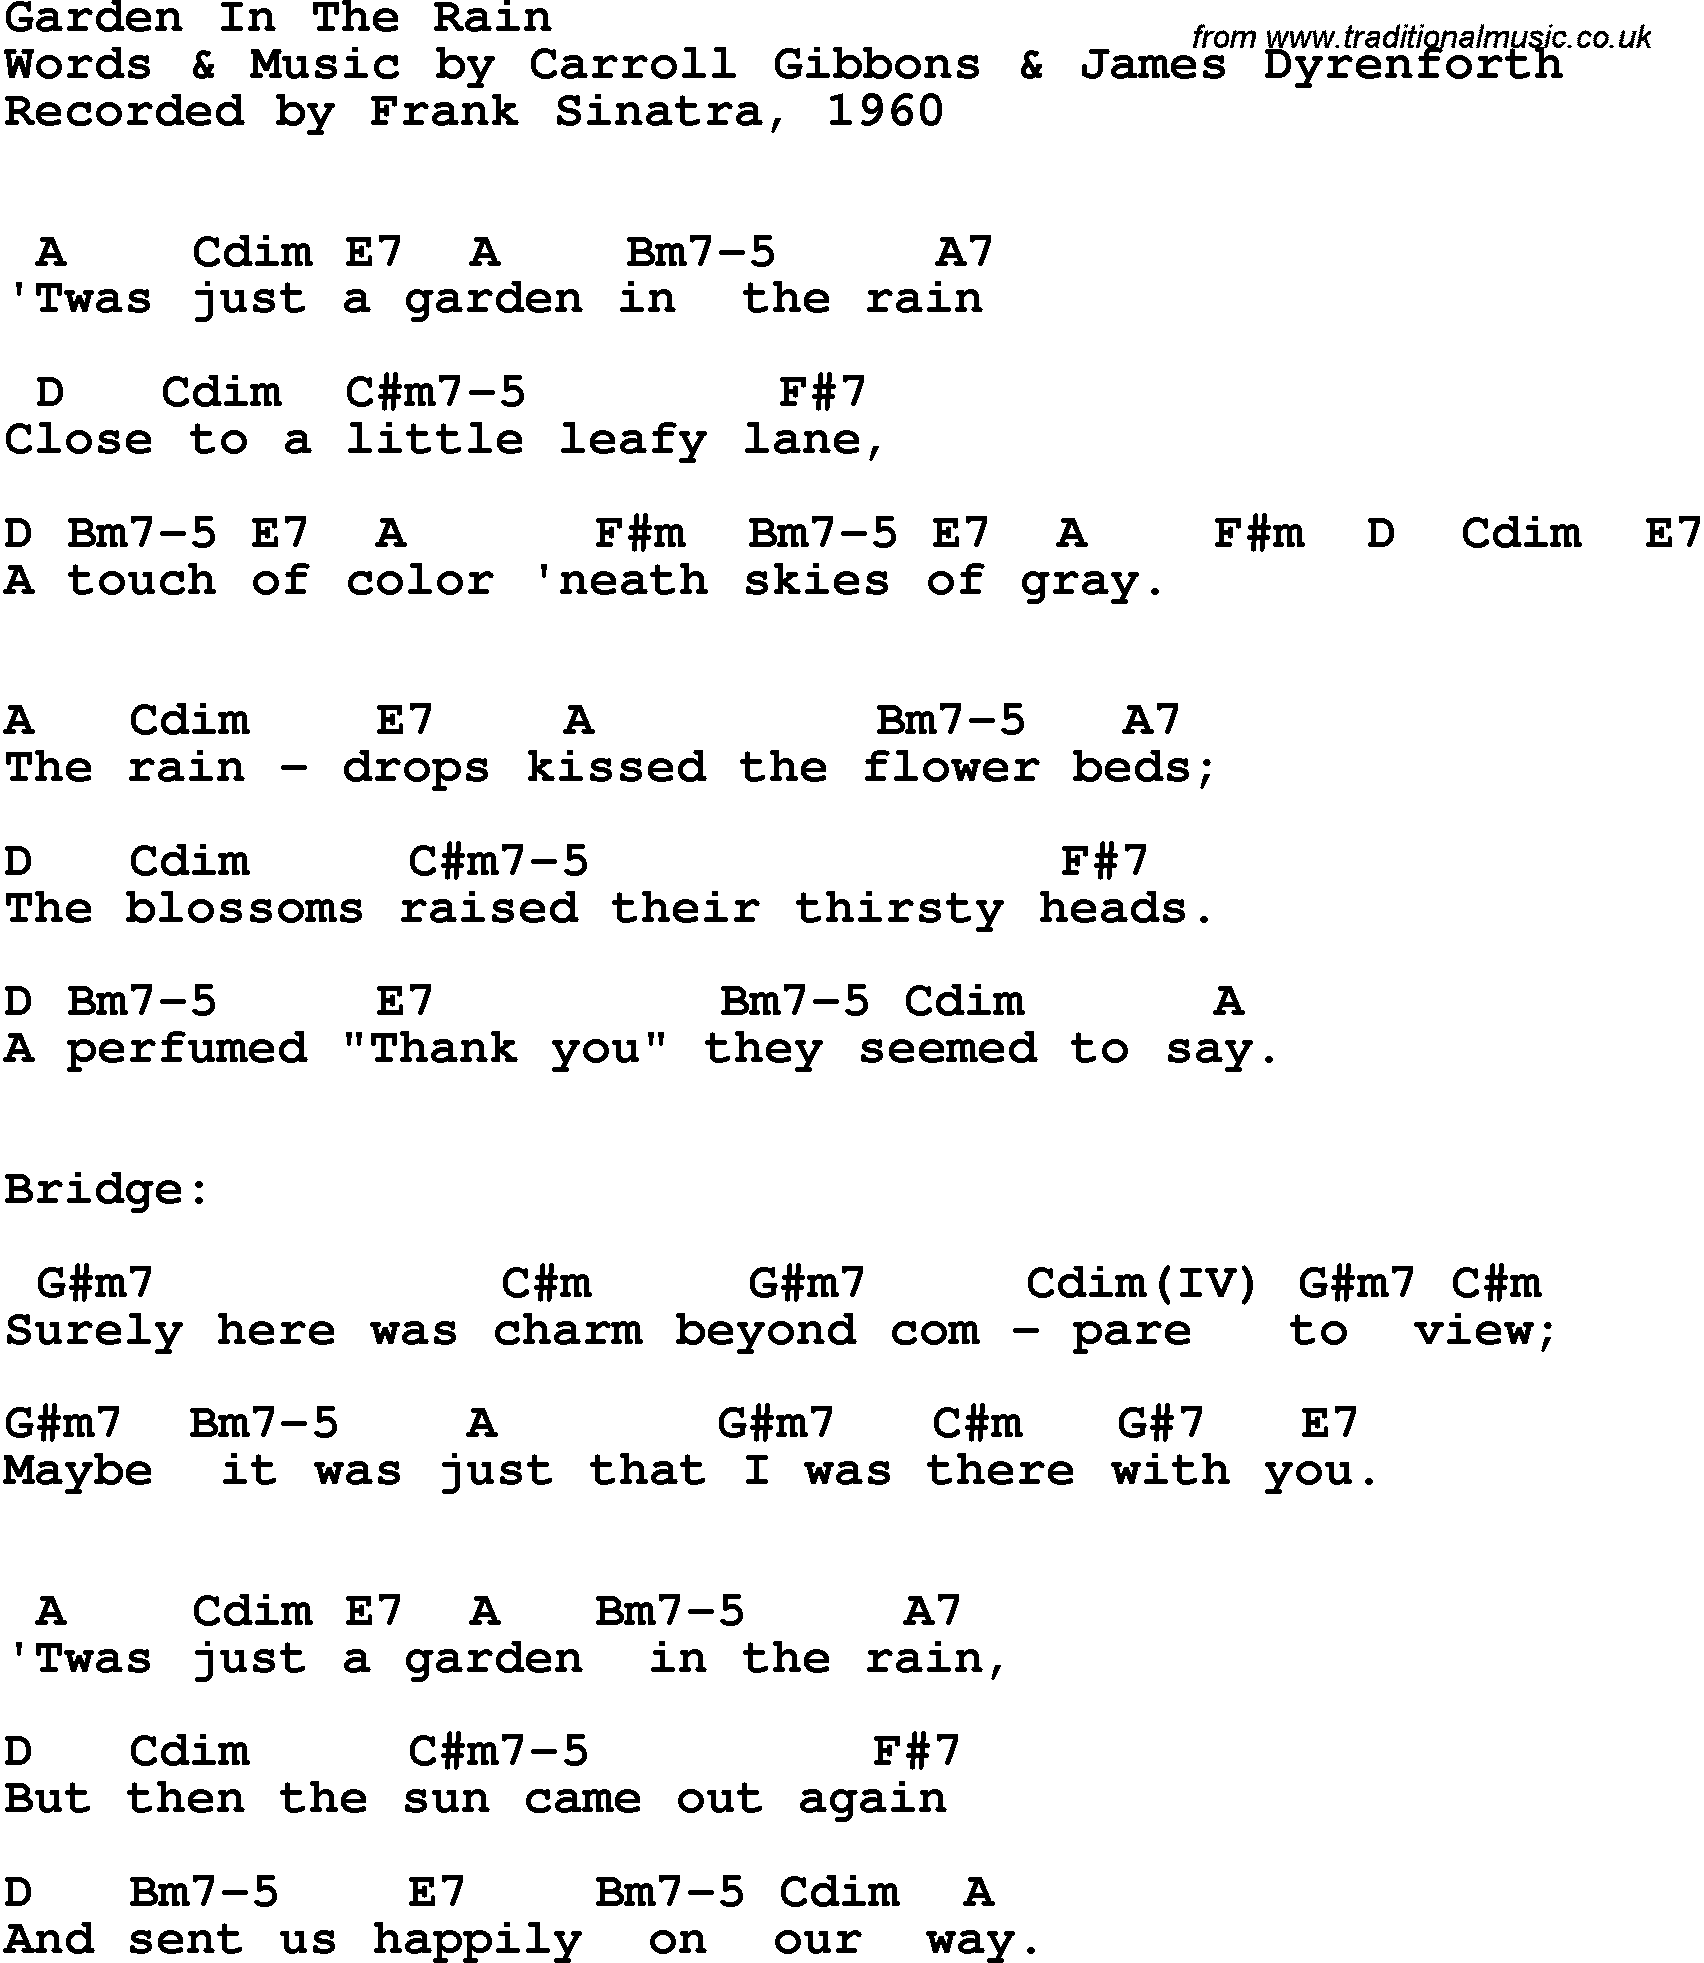 Song Lyrics with guitar chords for Garden In The Rain - Frank Sinatra, 1960